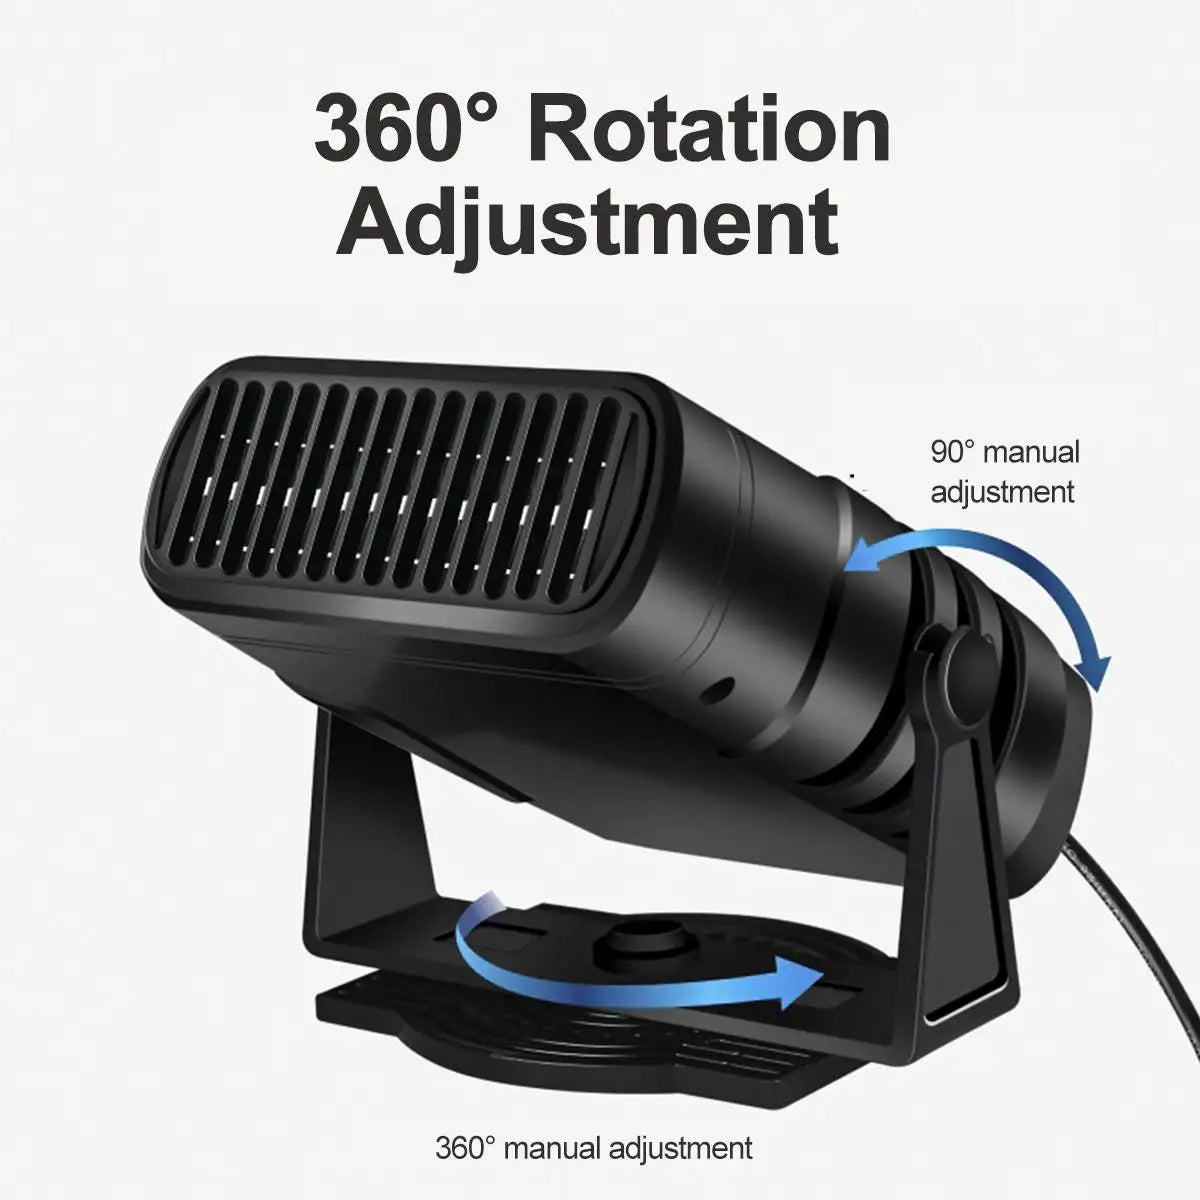 12V Car Heater 2 In 1 Car Windshield Fast Heating Defrost Defogger 360 Degree Rotation Auto Heater For Interior Accessories